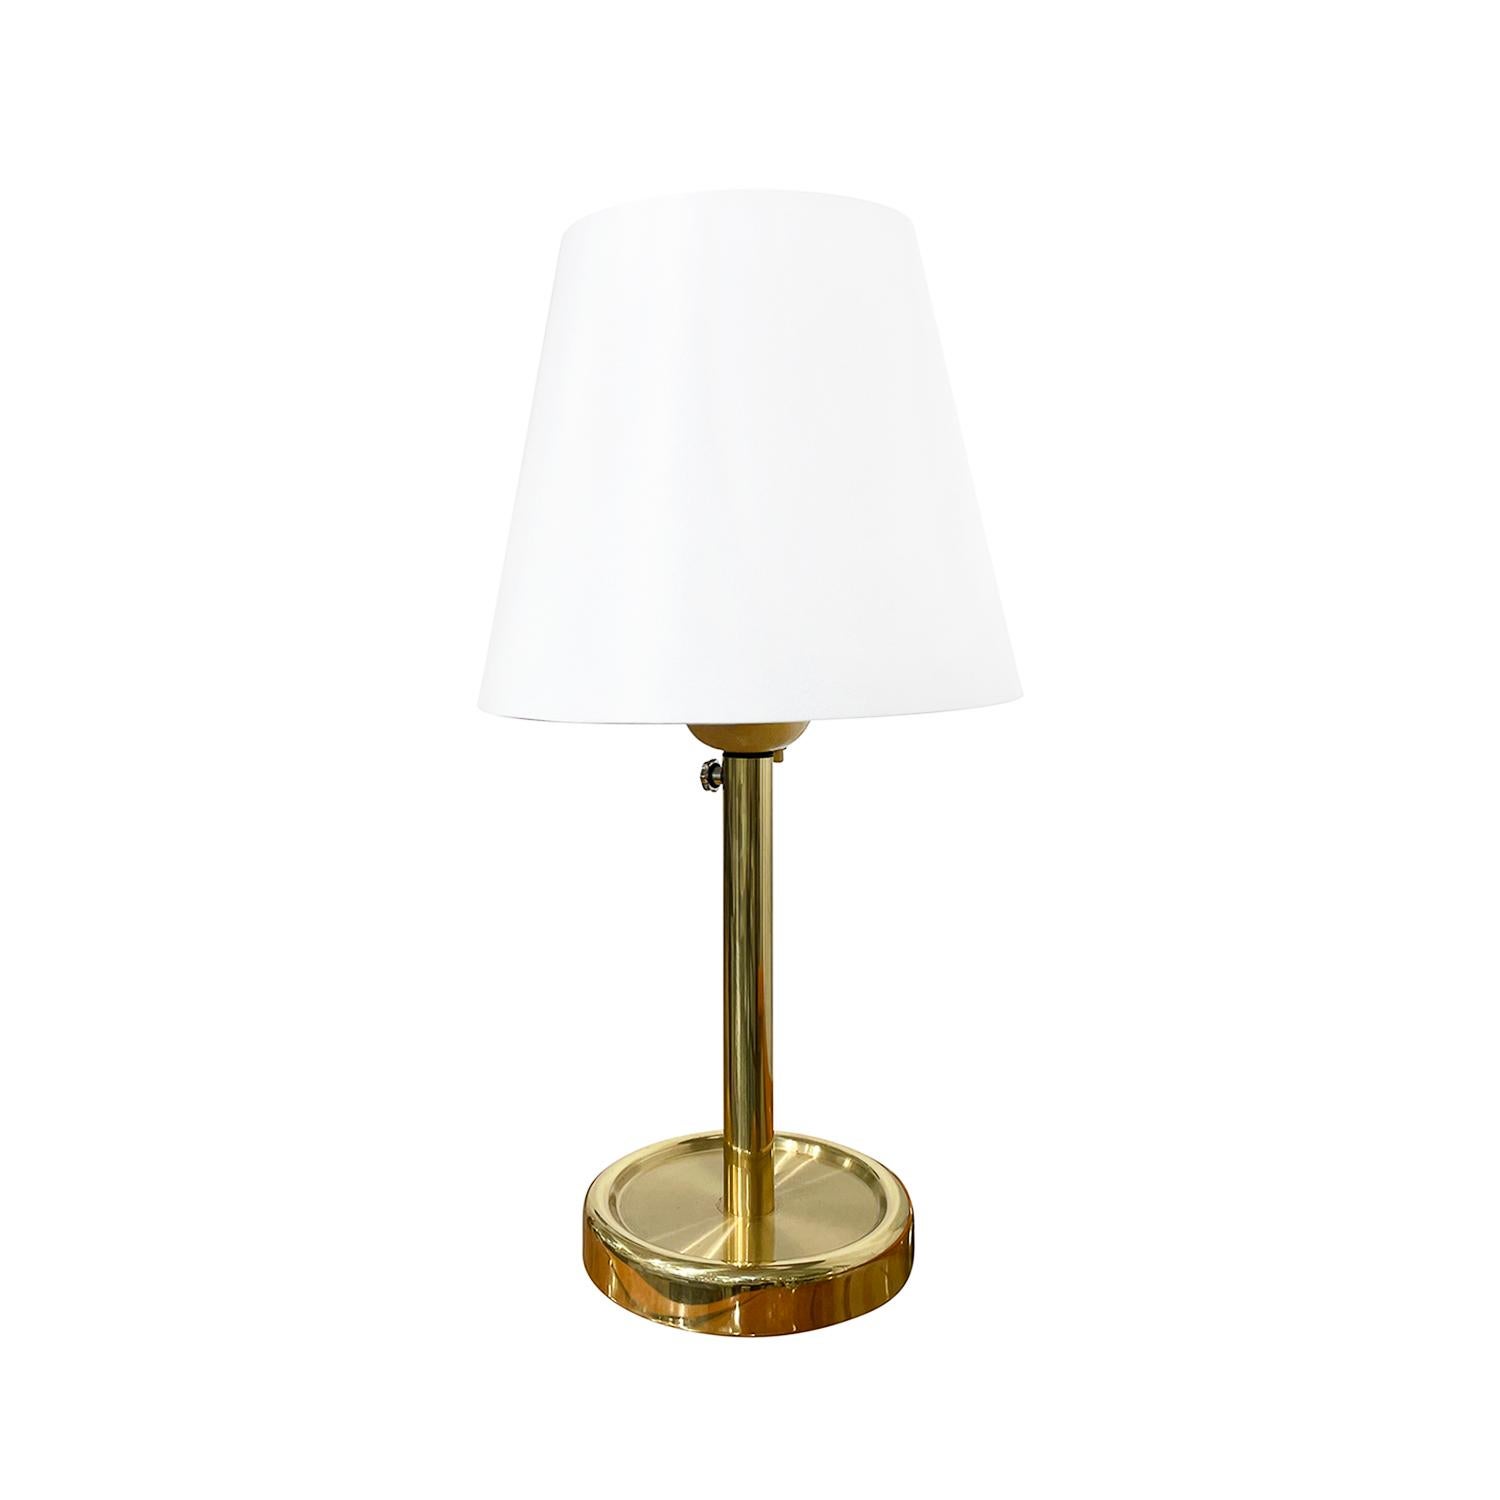 A vintage Mid-Century modern Swedish table lamp with a new white round shade made of hand crafted polished brass, designed and produced by Fagerhults Belysning in good condition. The Scandinavian desk light is composed with its original chrome light